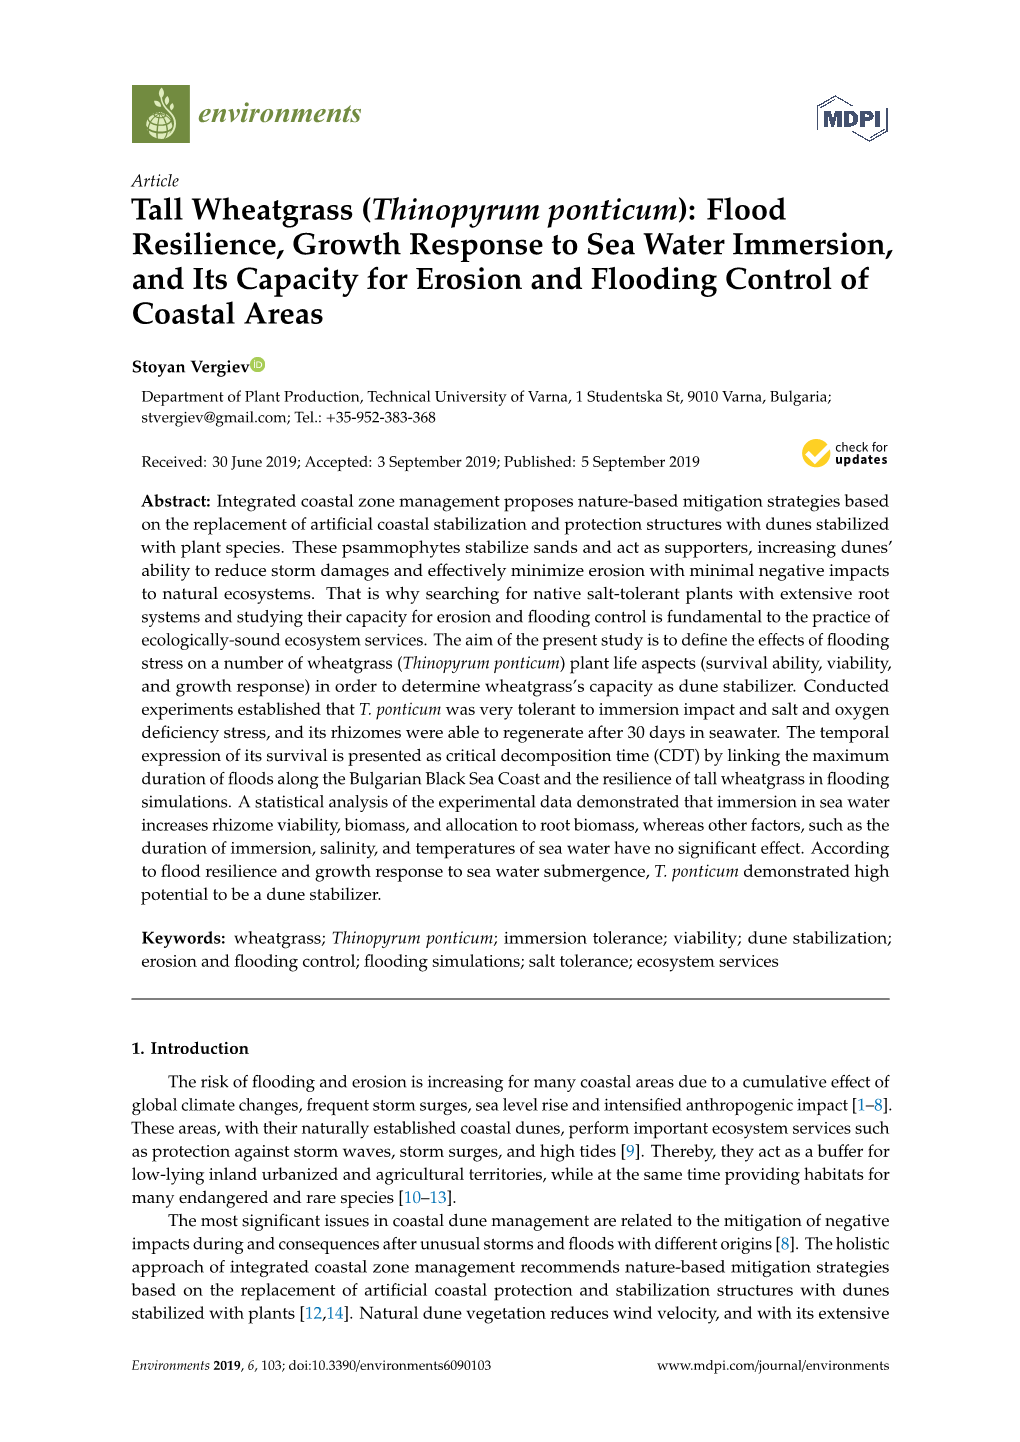 Thinopyrum Ponticum): Flood Resilience, Growth Response to Sea Water Immersion, and Its Capacity for Erosion and Flooding Control of Coastal Areas